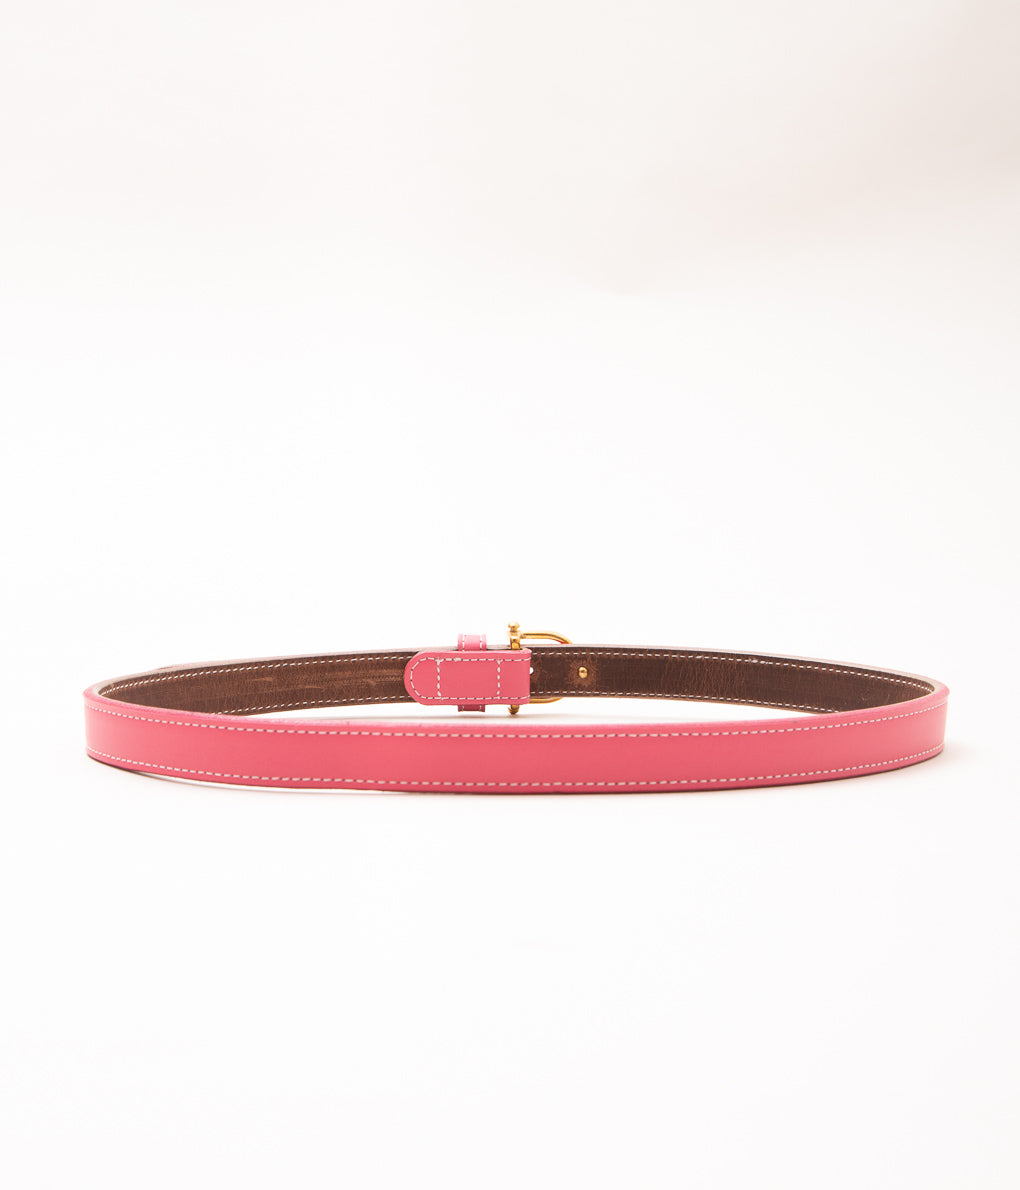 TORY LEATHER ''3005 3/4 BRIDLE LEATHER SPUR BELT'' (HOT PINK)